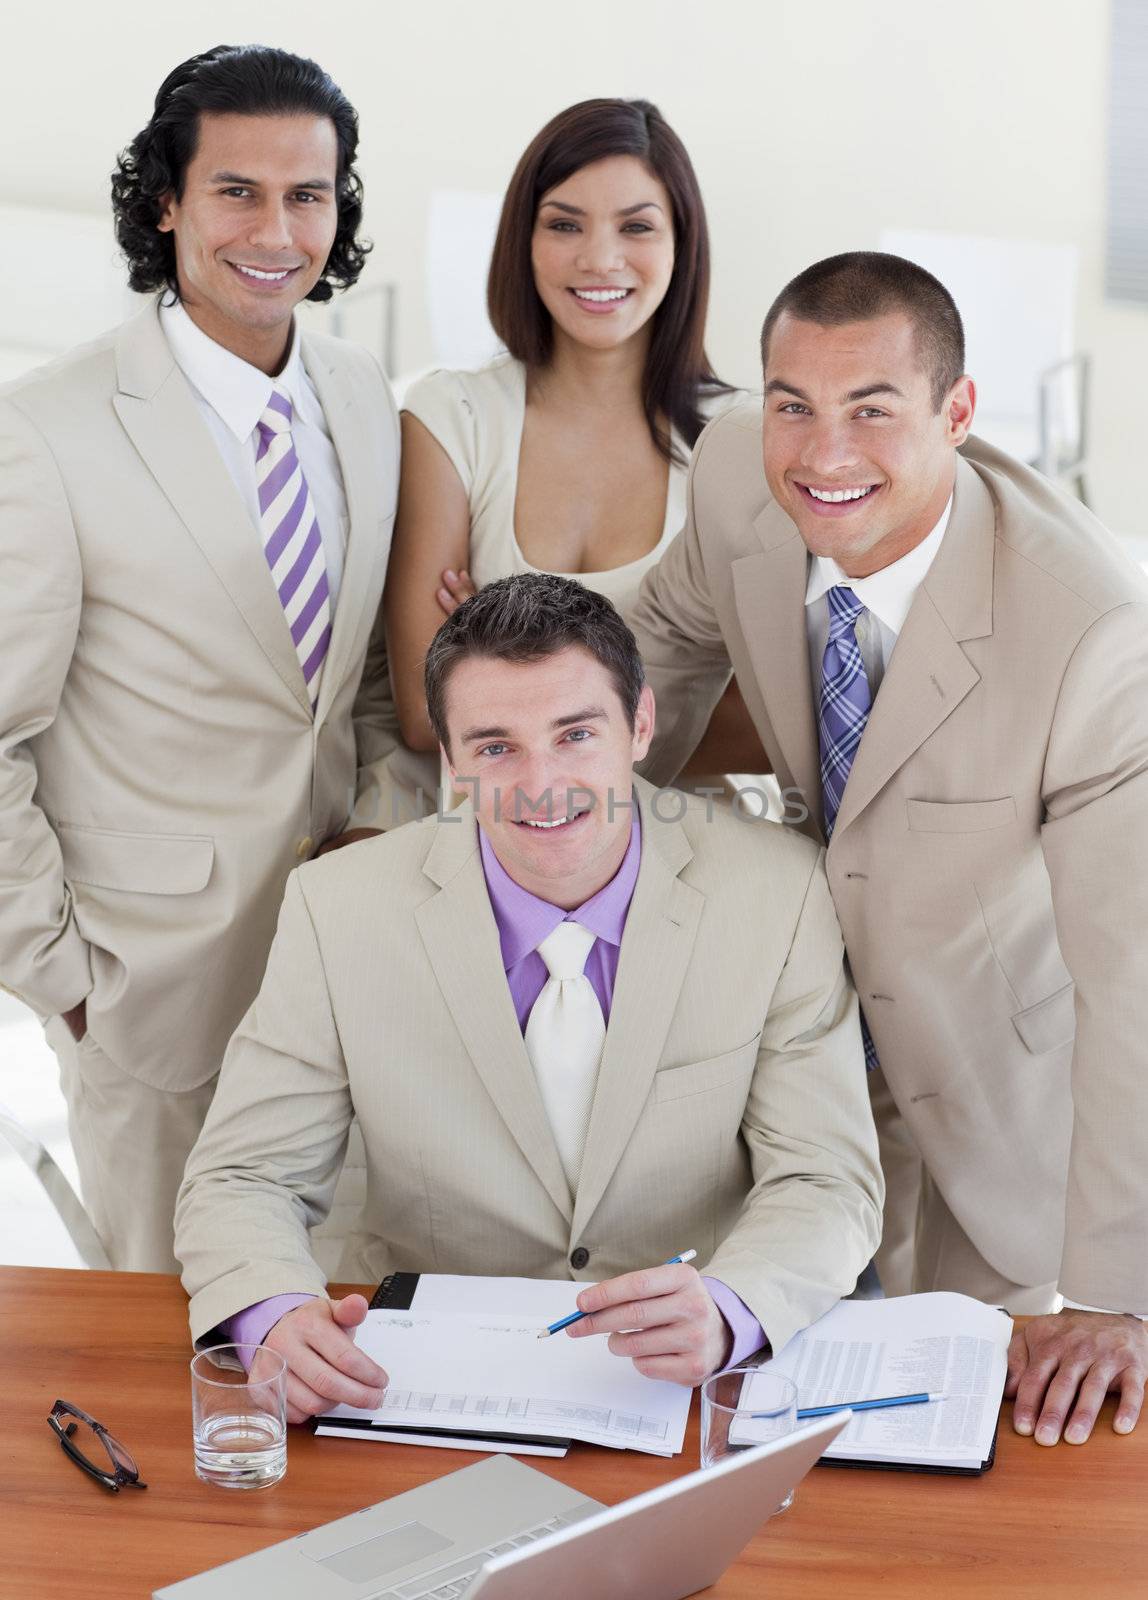 Assertive business people studying a document in a meeting